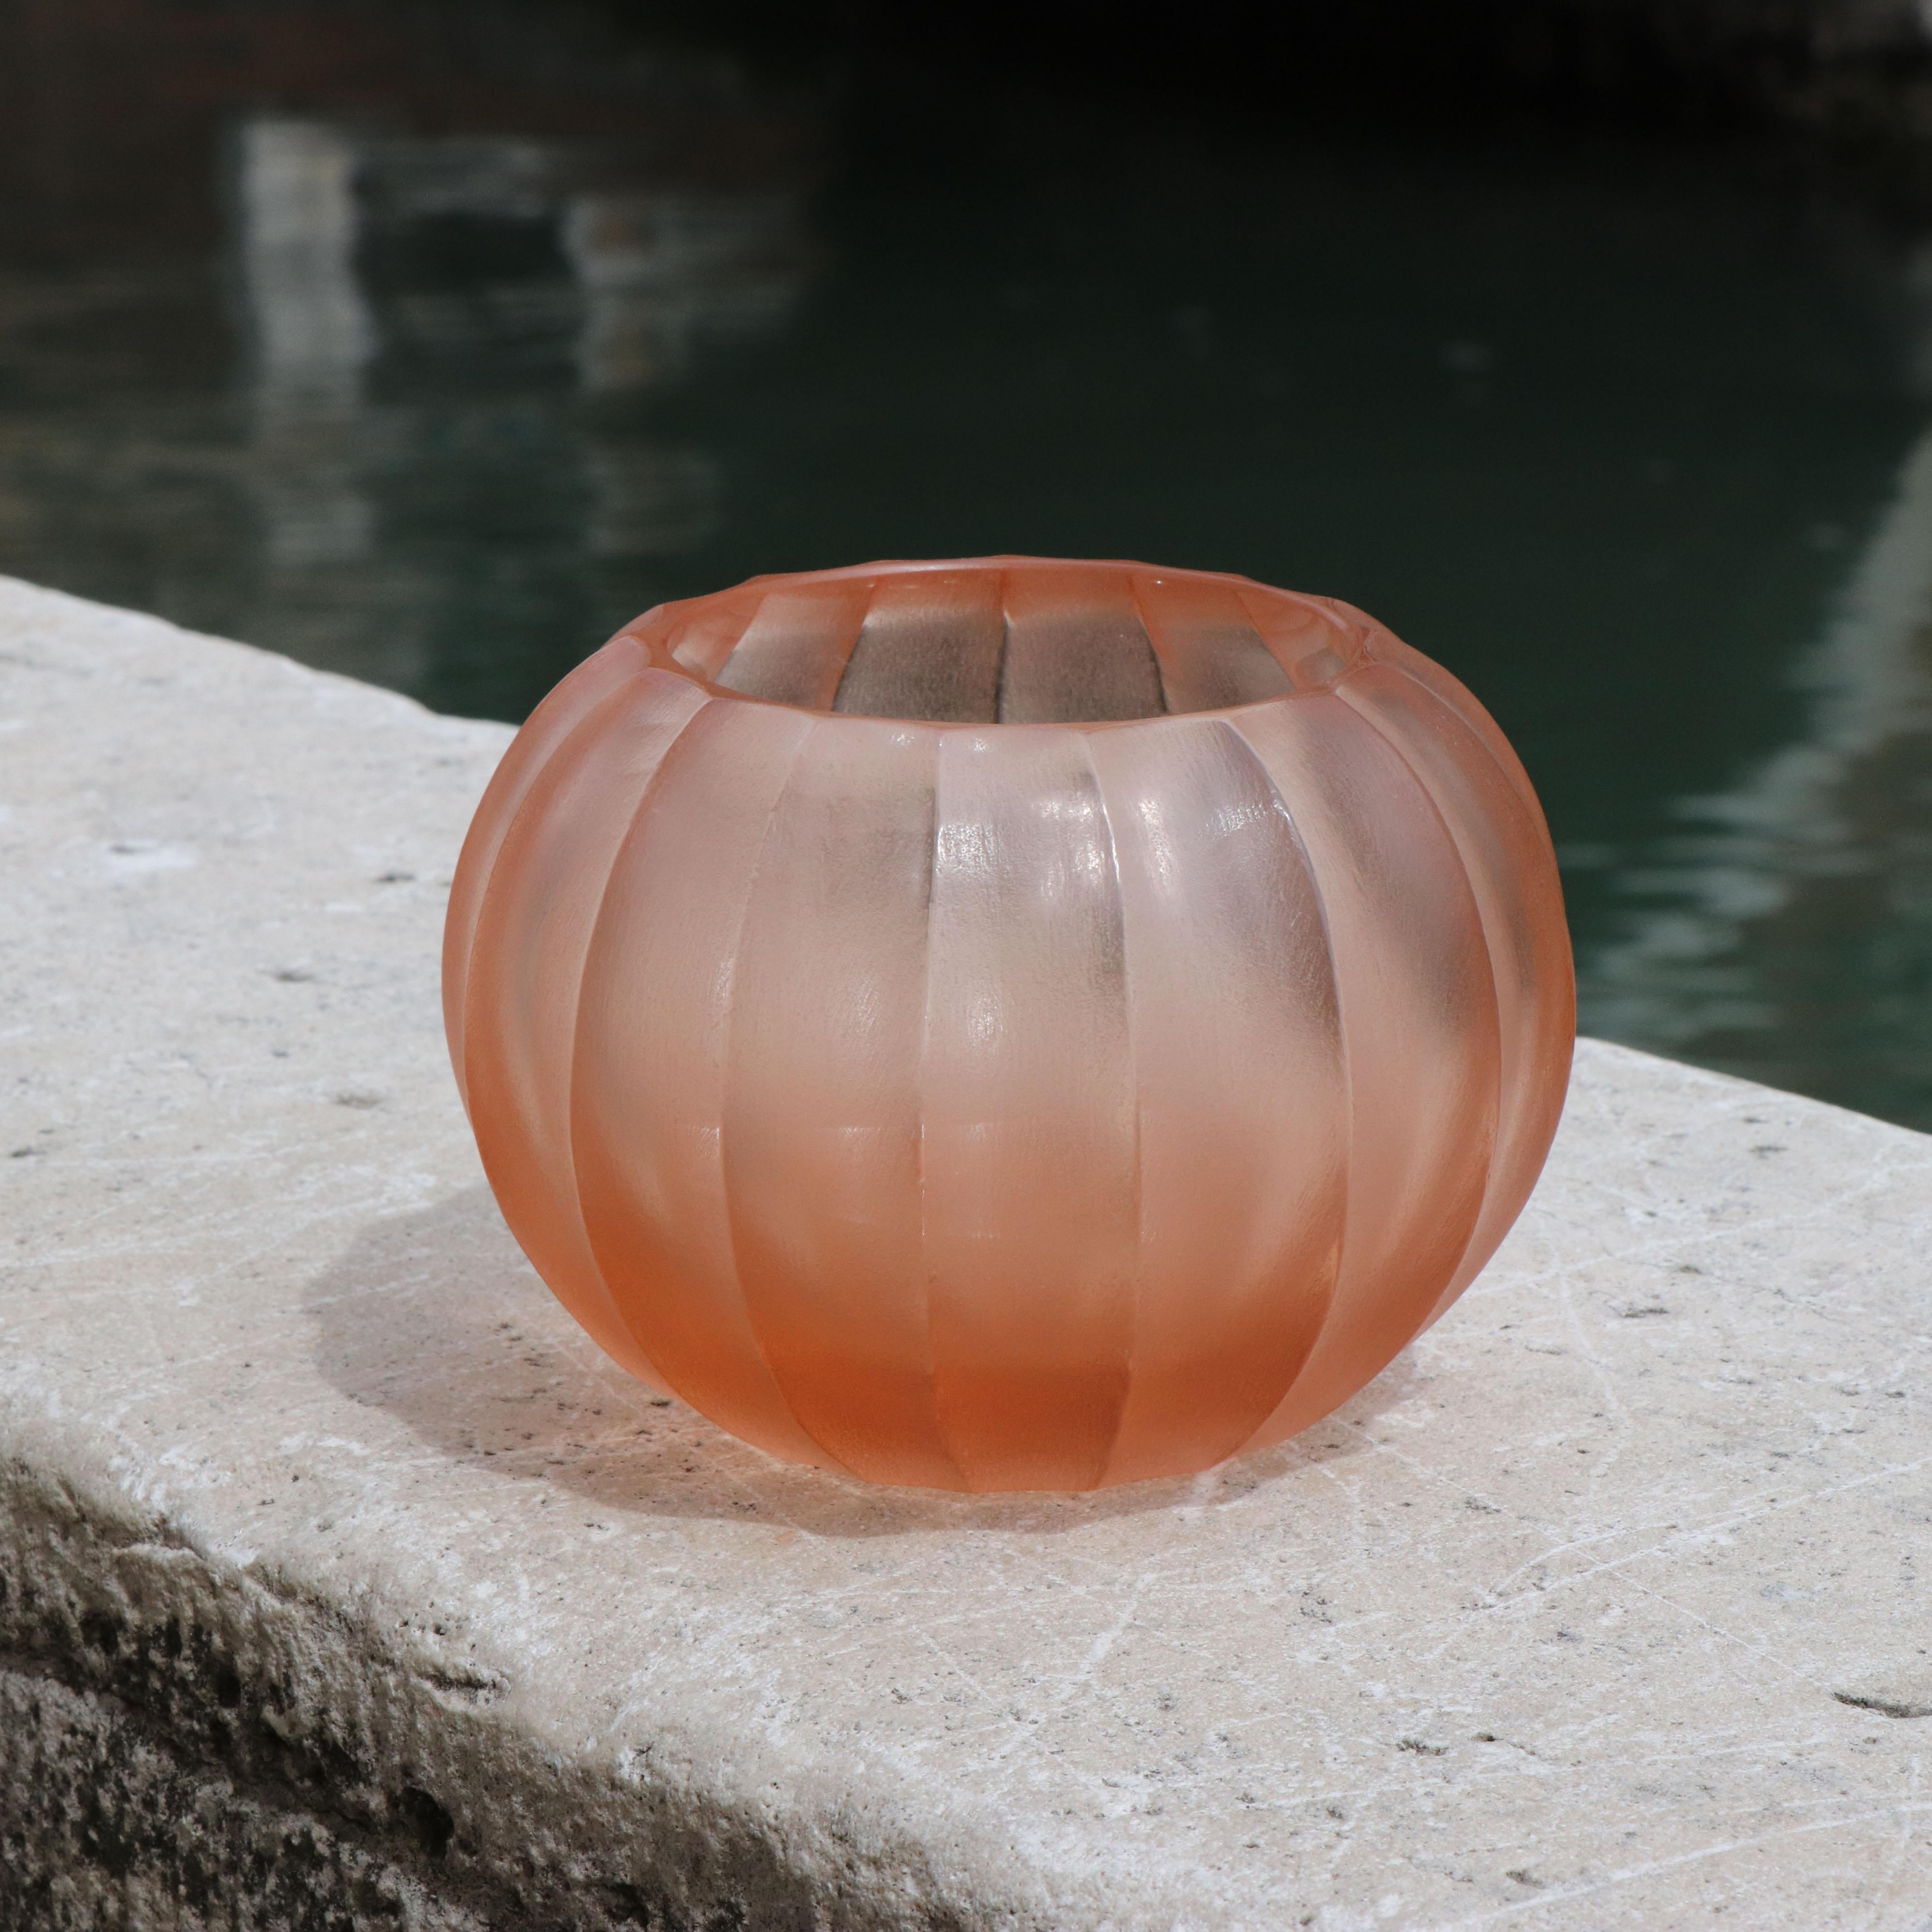 This small vase is called Bocia, a word from the Venetian dialect which means ‘little one’. Its round shape is achieved by first mouth blowing the molten glass. Once cooled the surface of the vase is finished with carving and polishing techniques